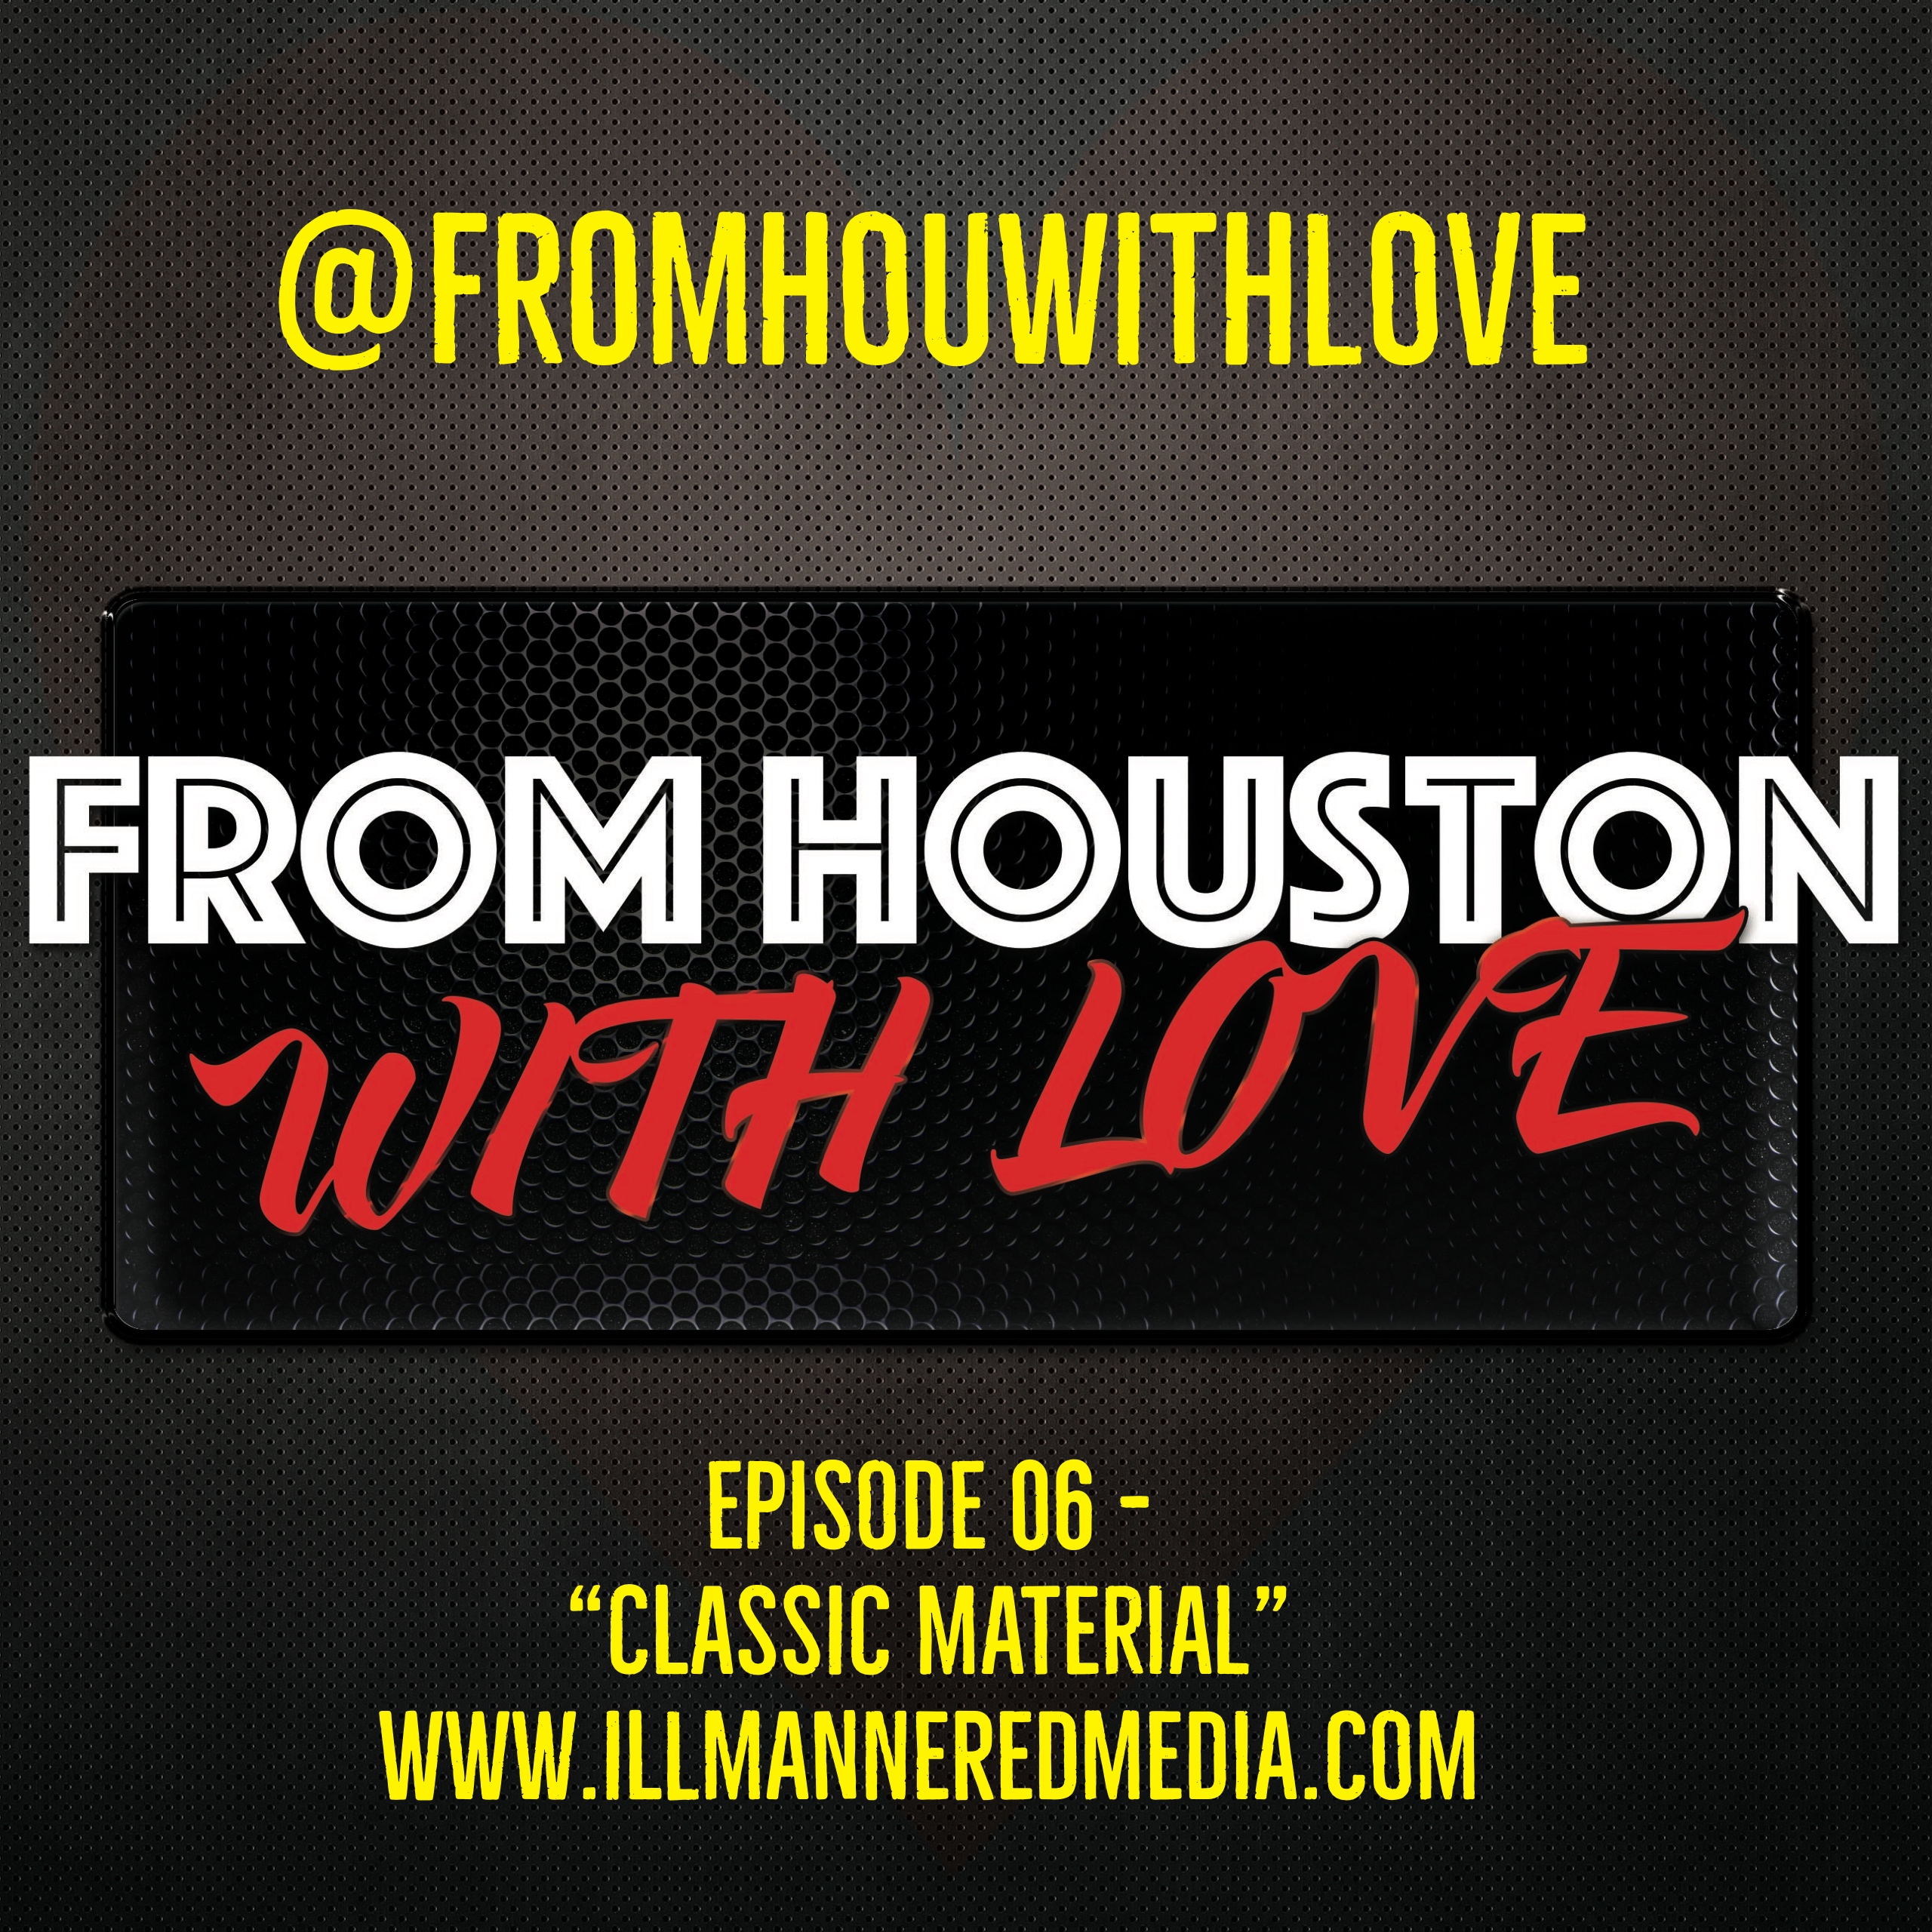 From Houston With Love (Podcast): Episode 06 – “Classic Material”